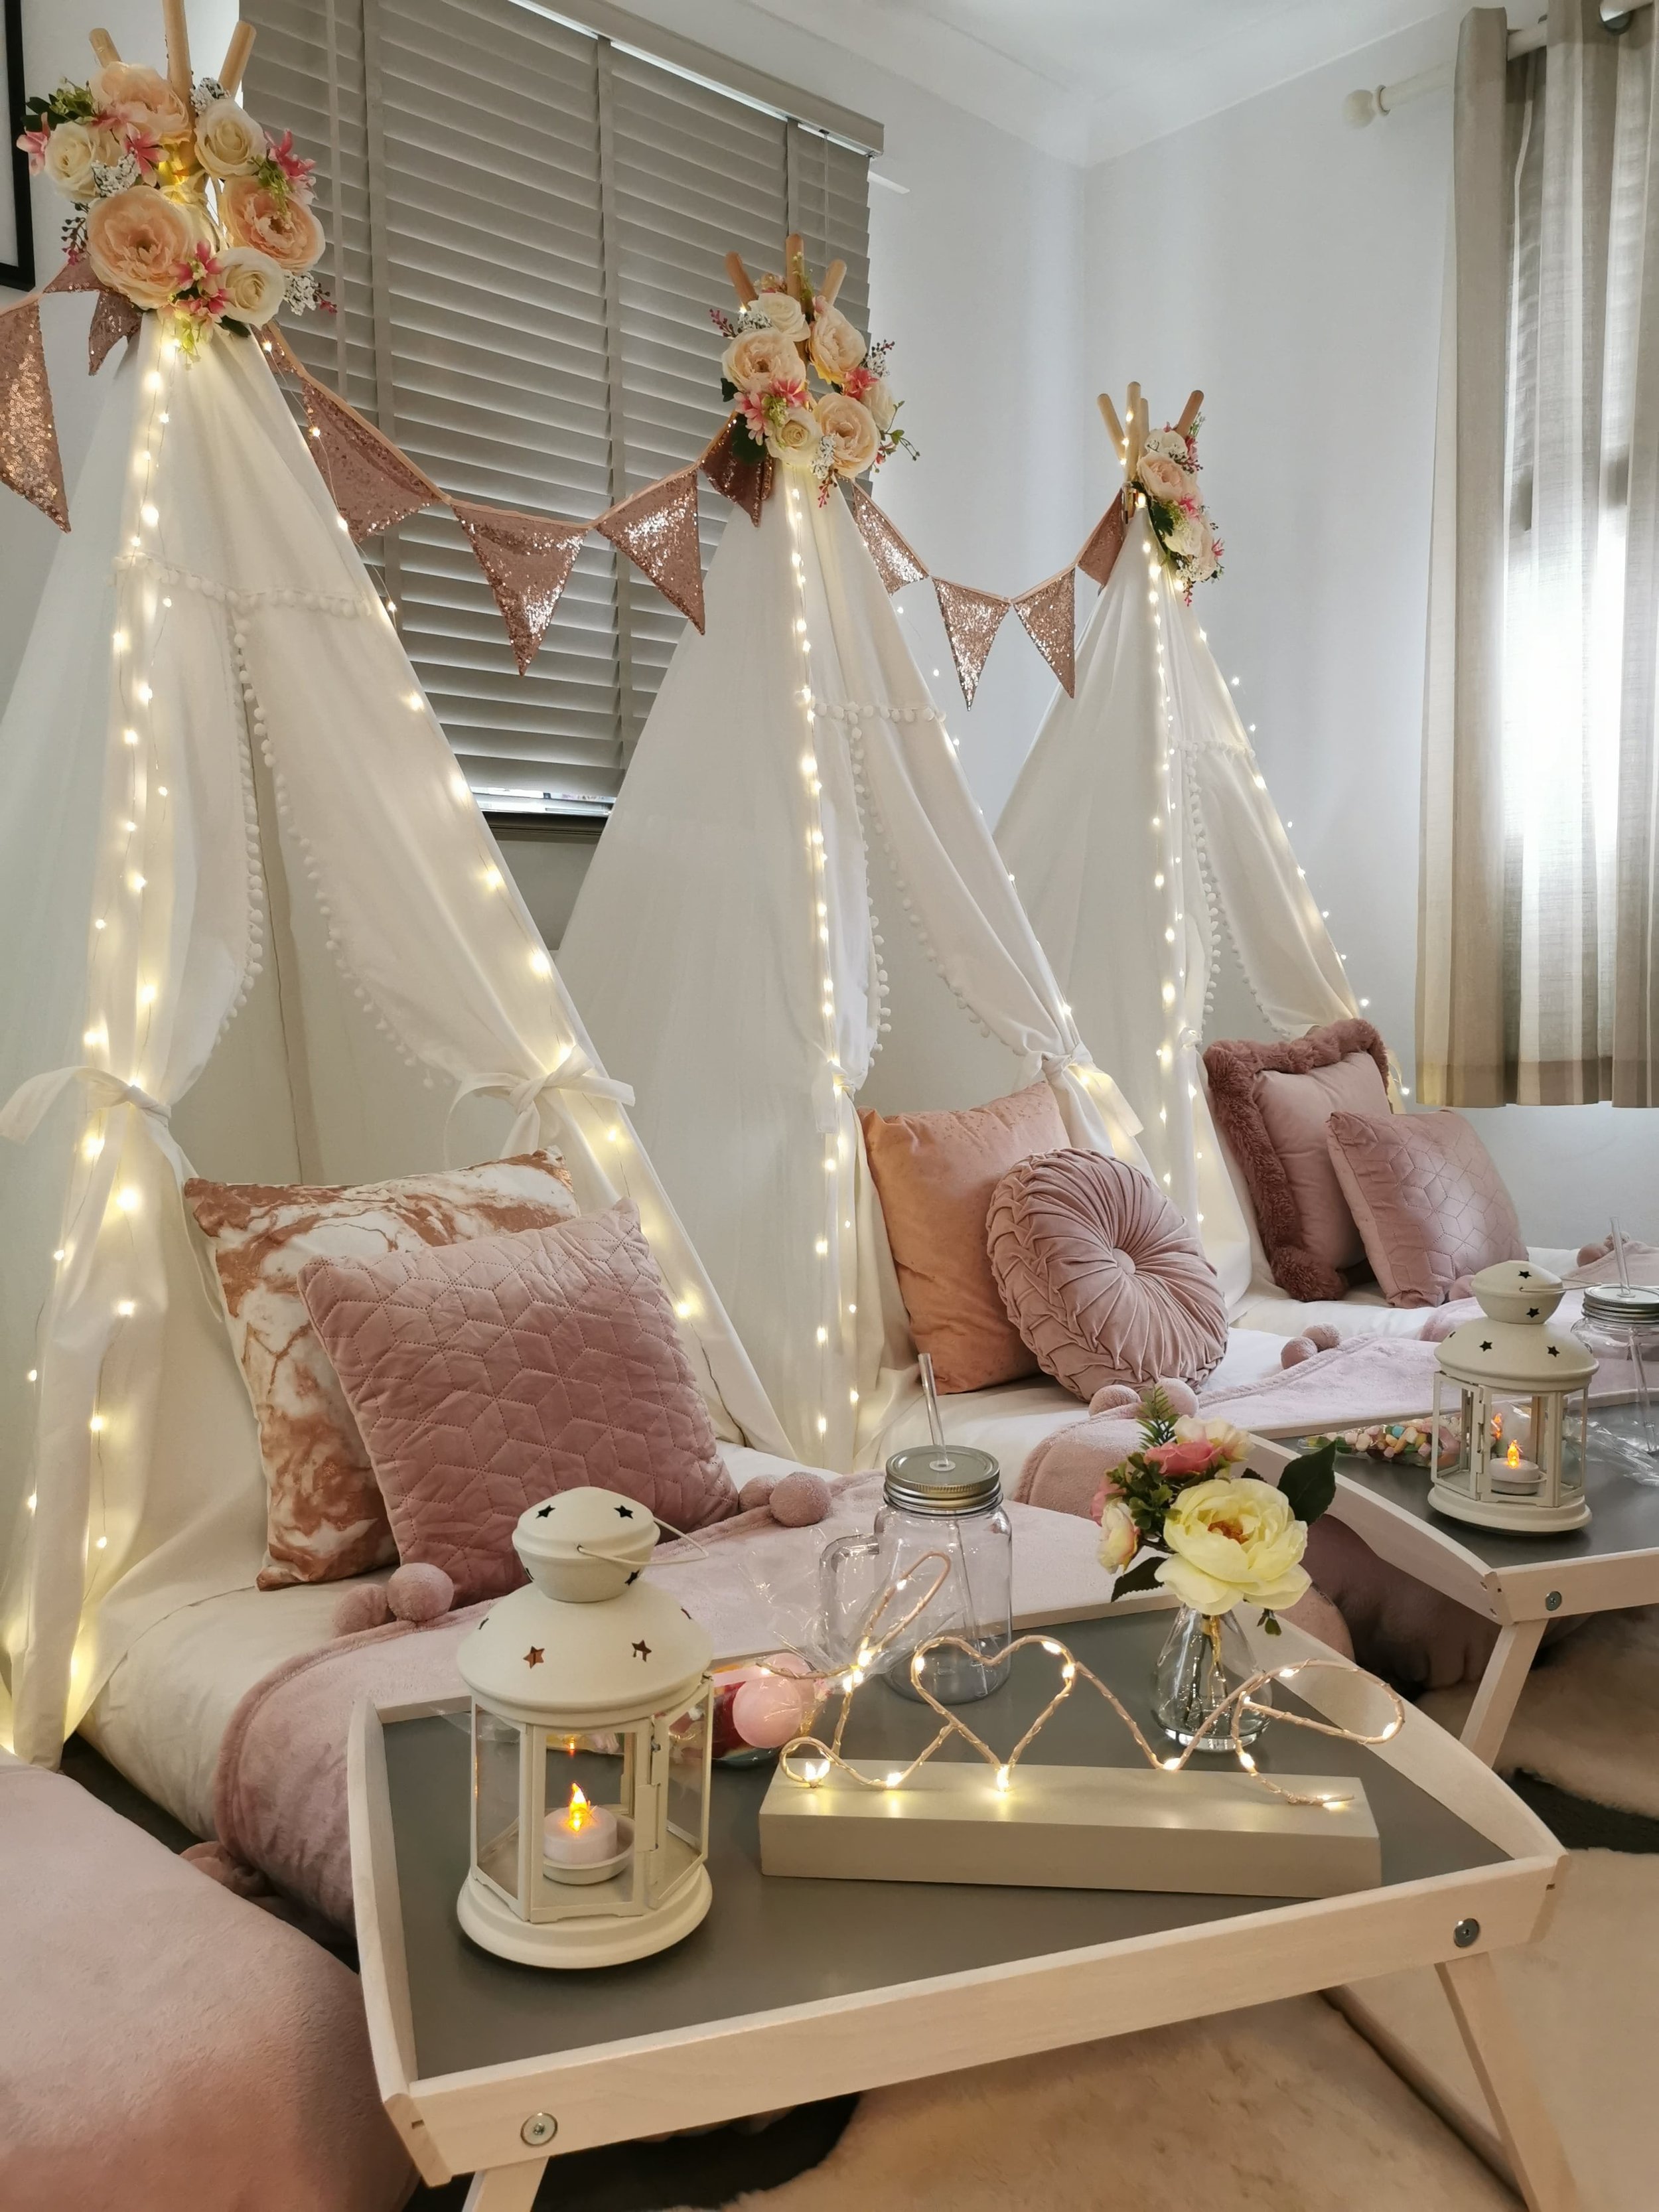 Glampees - Sleepover Party Tents in Berkshire